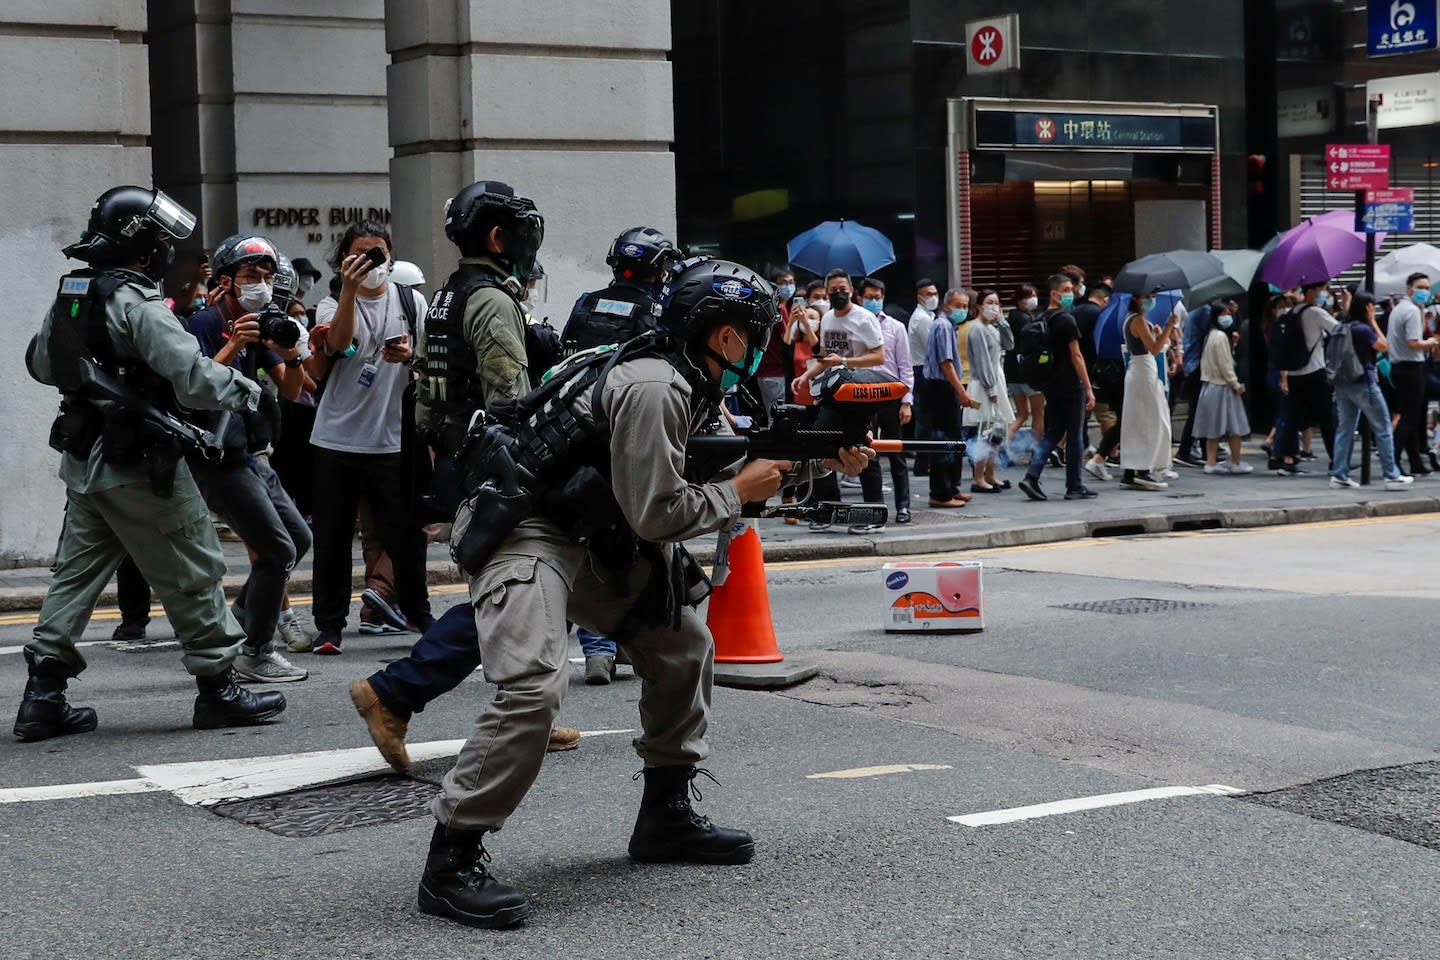 Hong Kong protesters defy police crackdown to resist China’s tightening grip